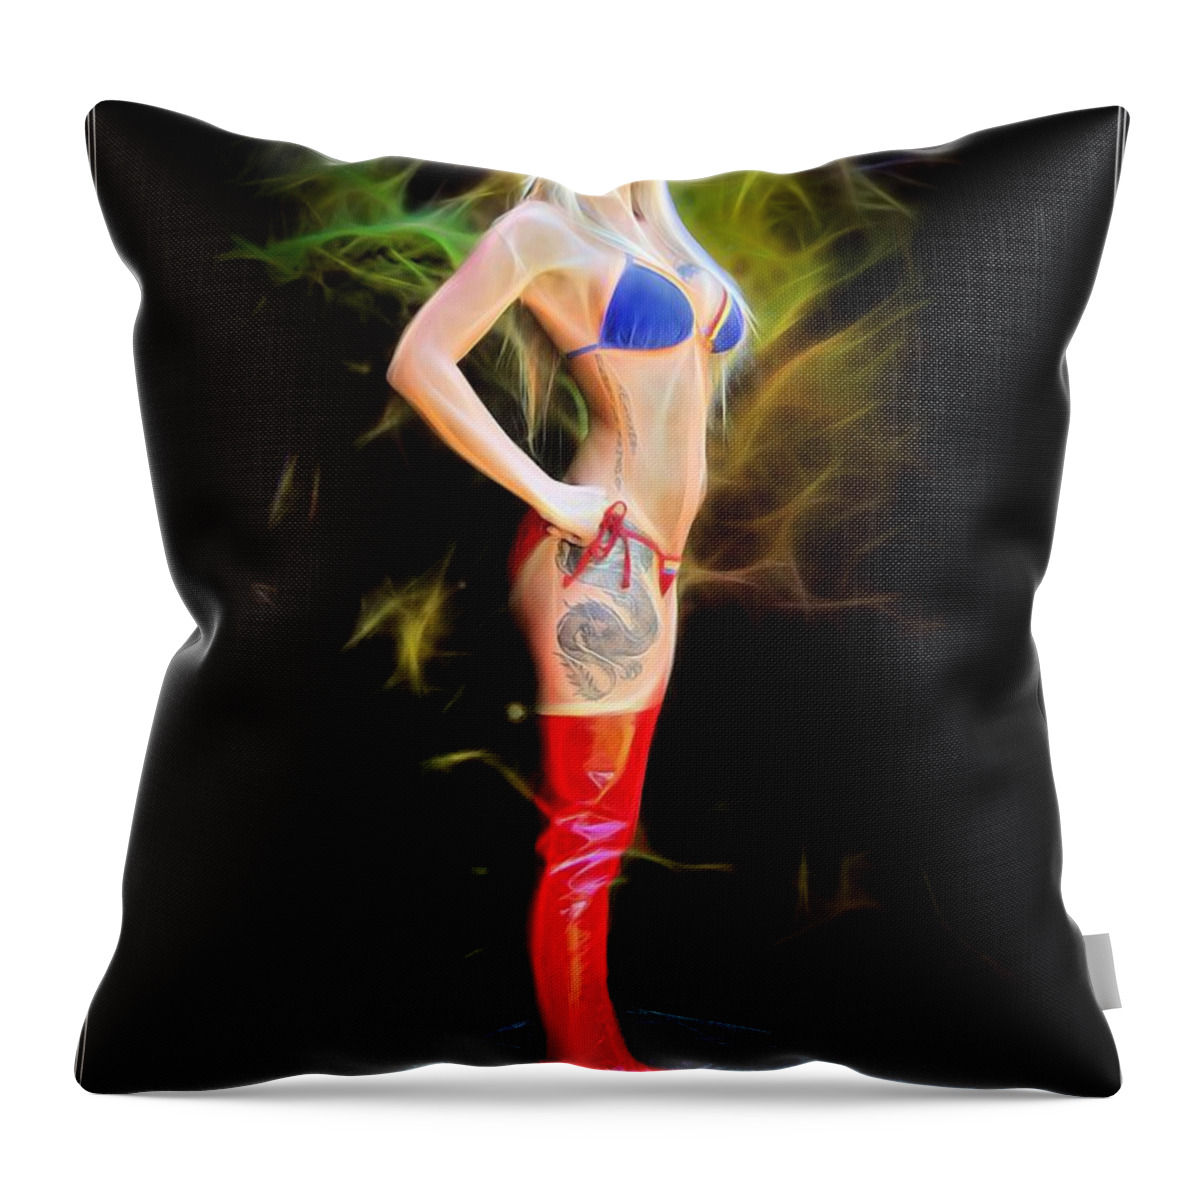 Fantasy Throw Pillow featuring the painting The Heroine Stands Alone by Jon Volden